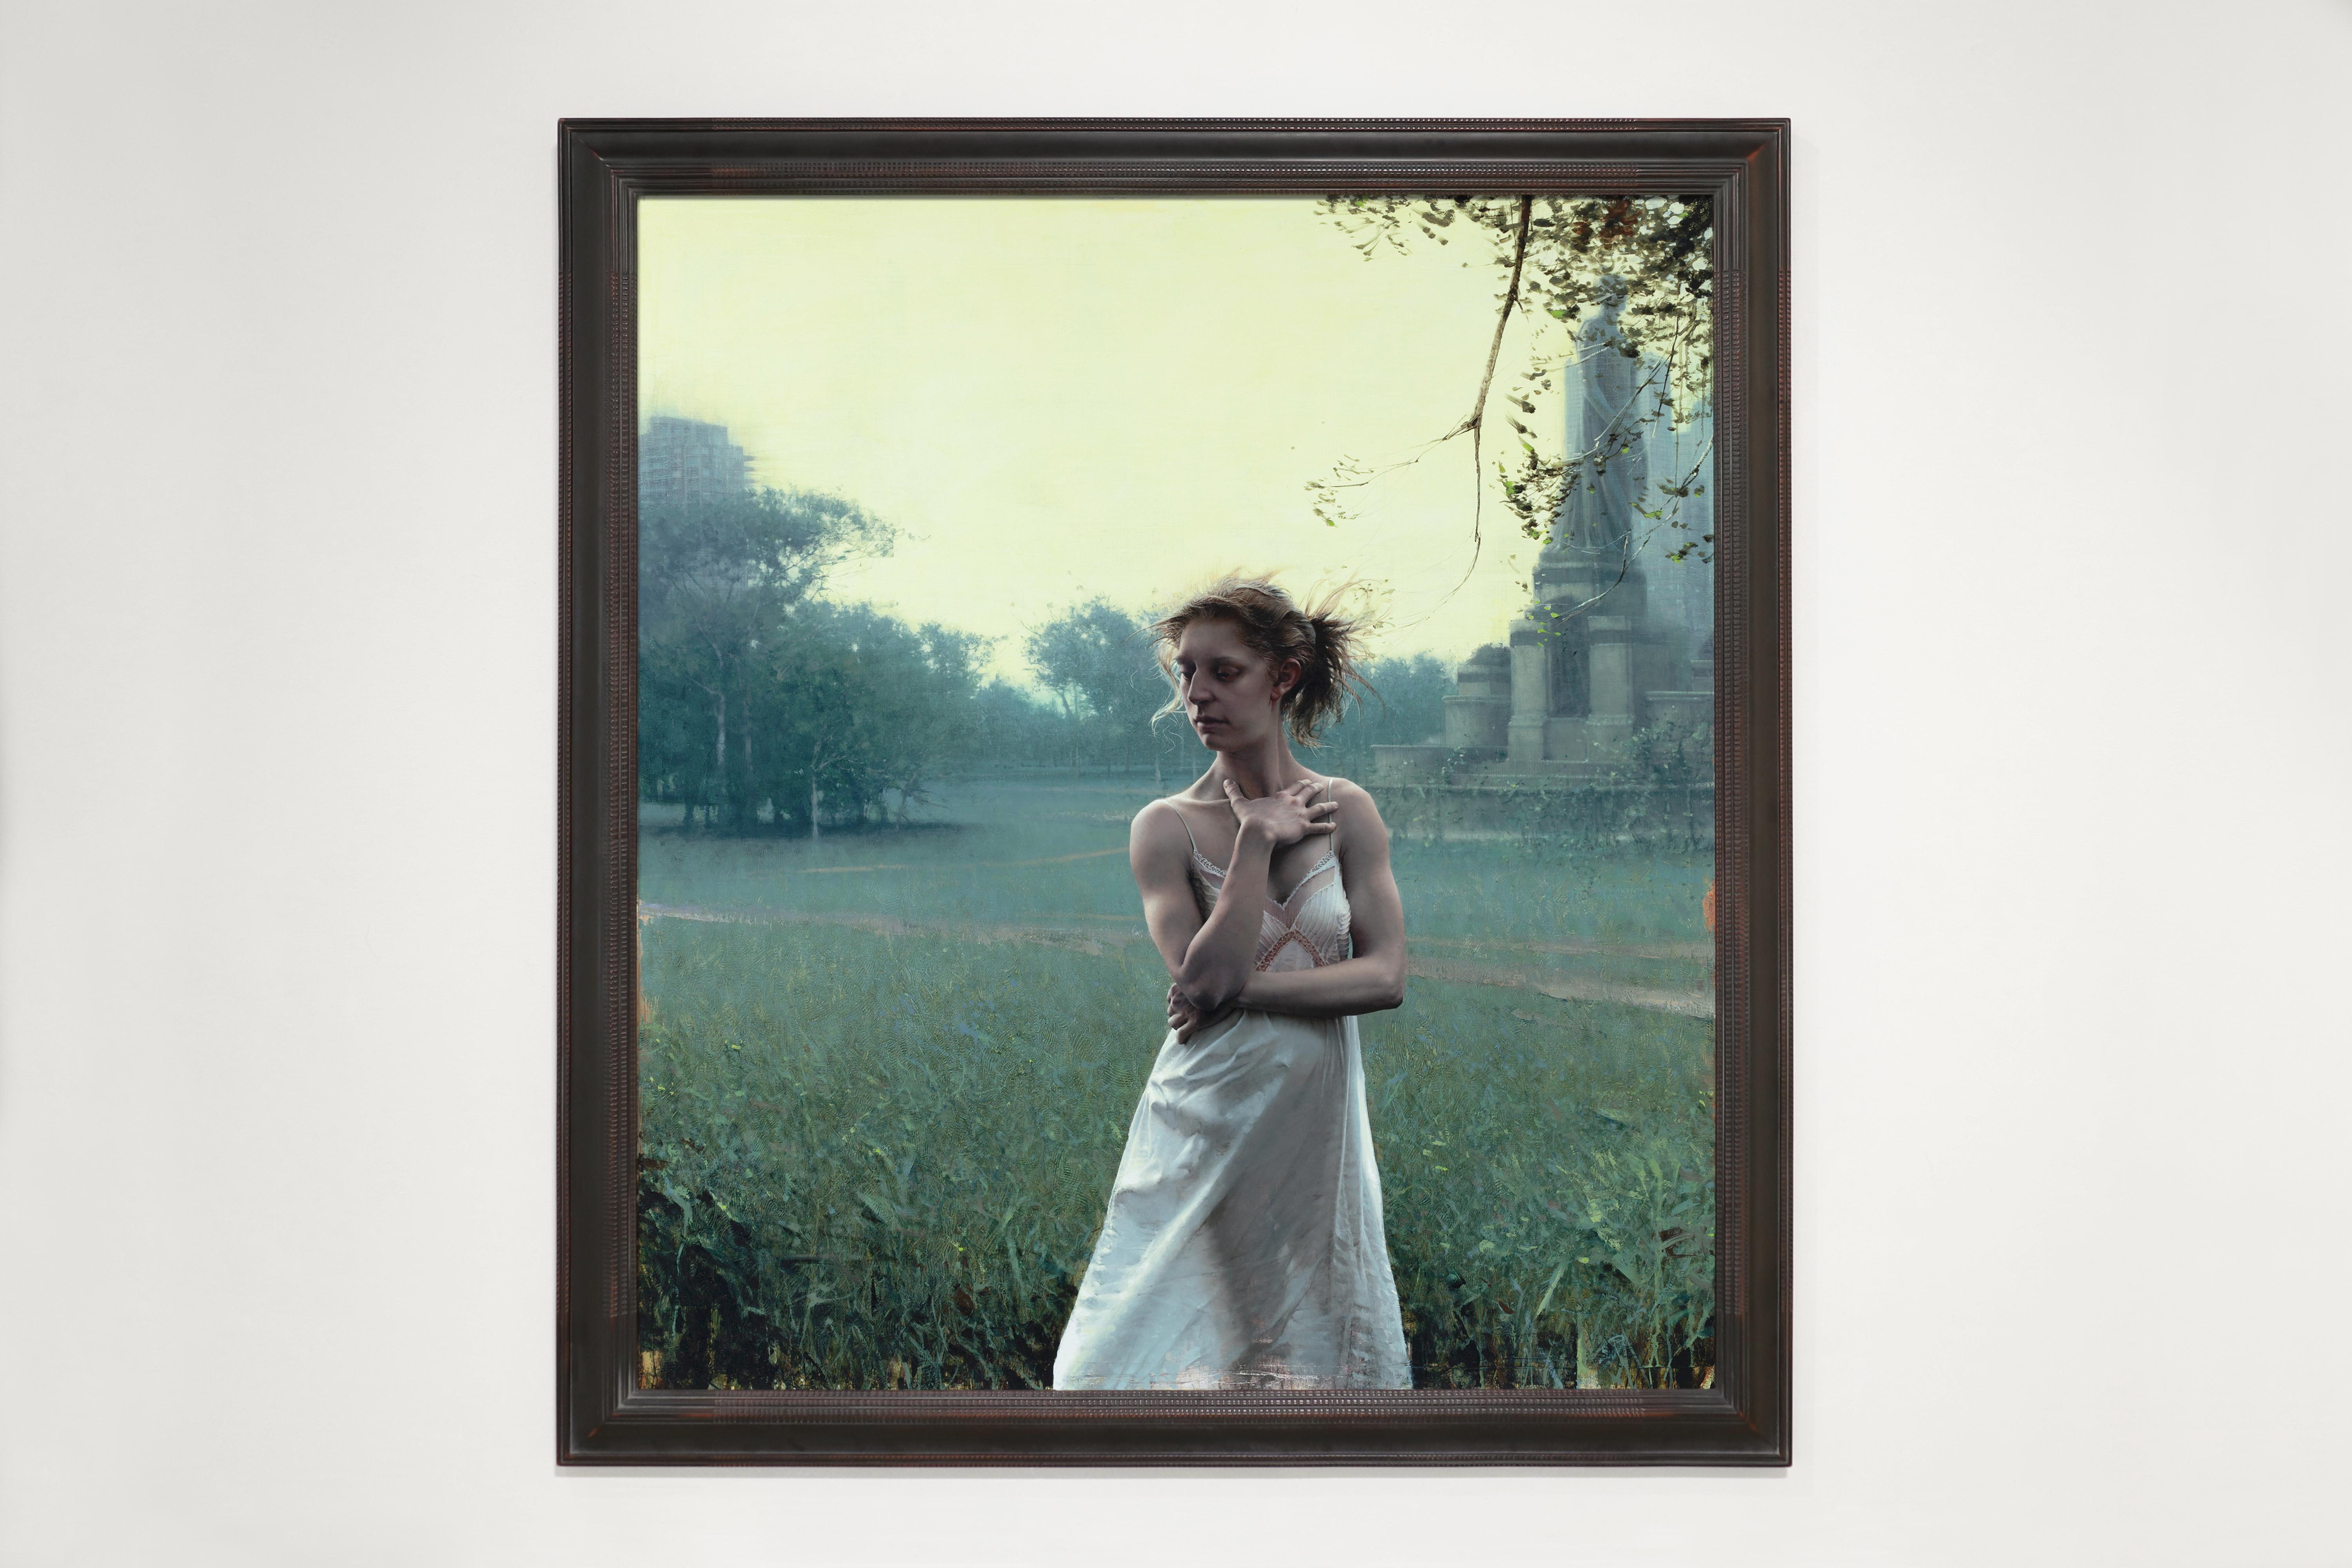 WAKE FROM DREAM., Photorealism, Woman in White Dress, landscape - Painting by Daniel Sprick